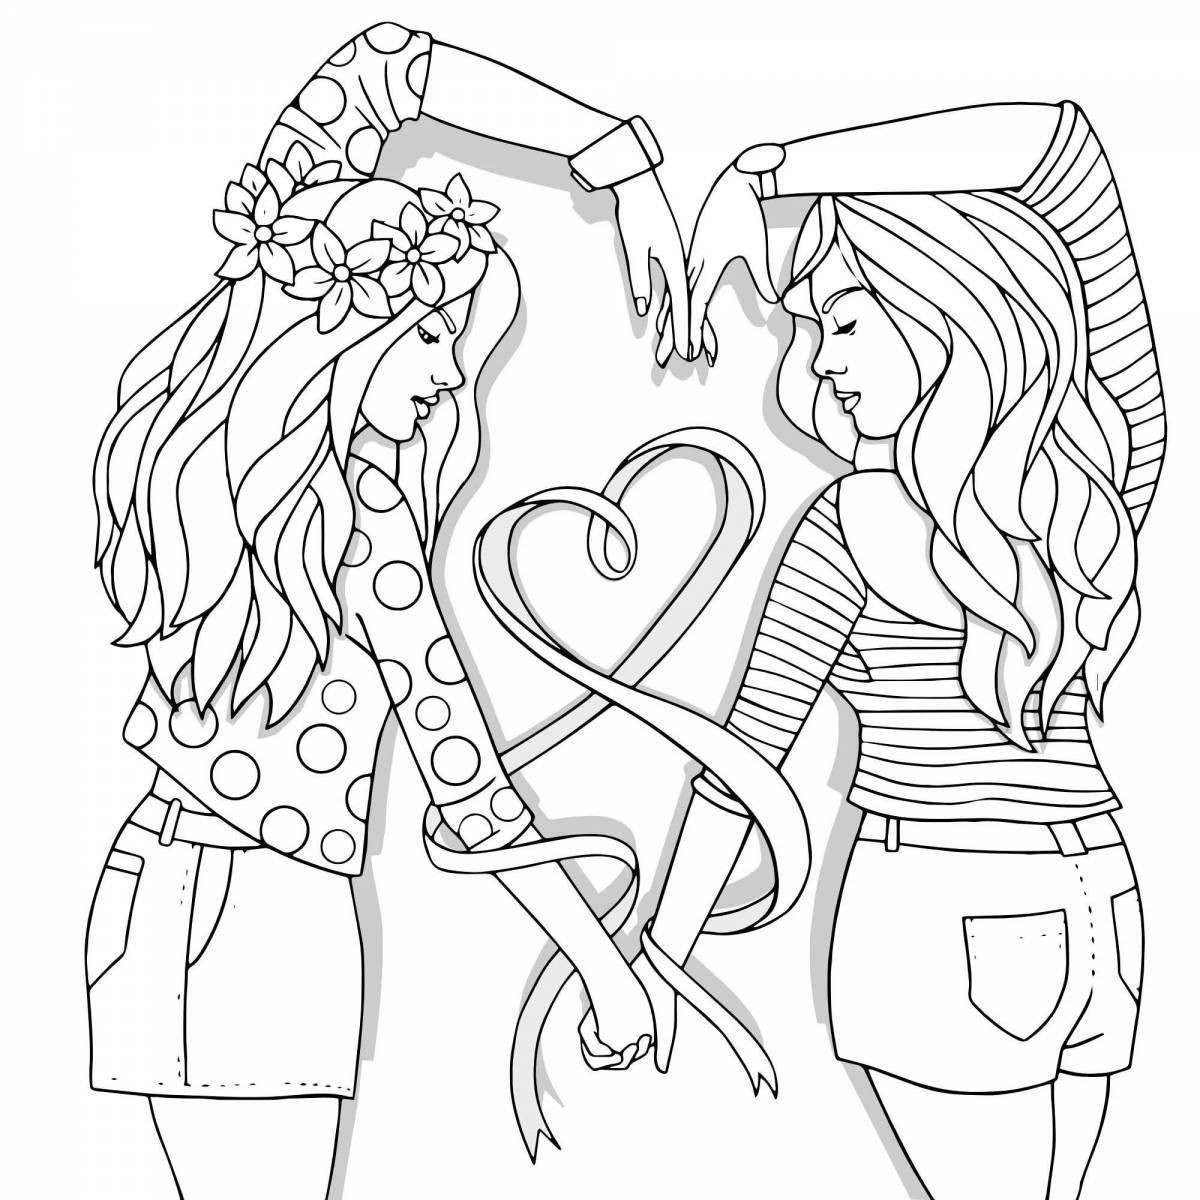 Fashionista cheek fight coloring page